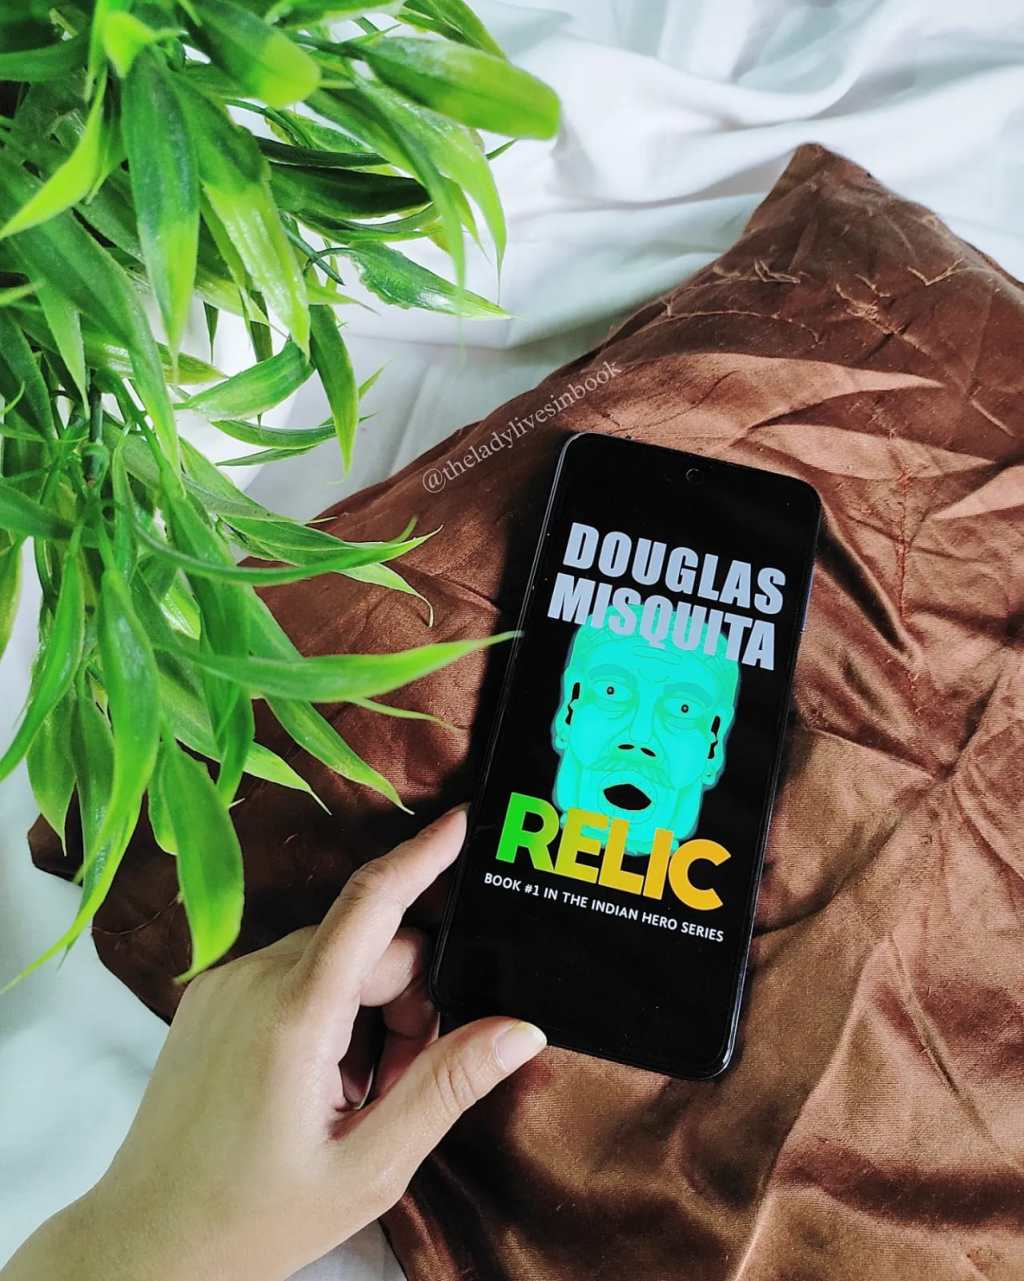 Beat the heat with hot and crispy crime thriller: Relic By Douglas Misquita – Book Review